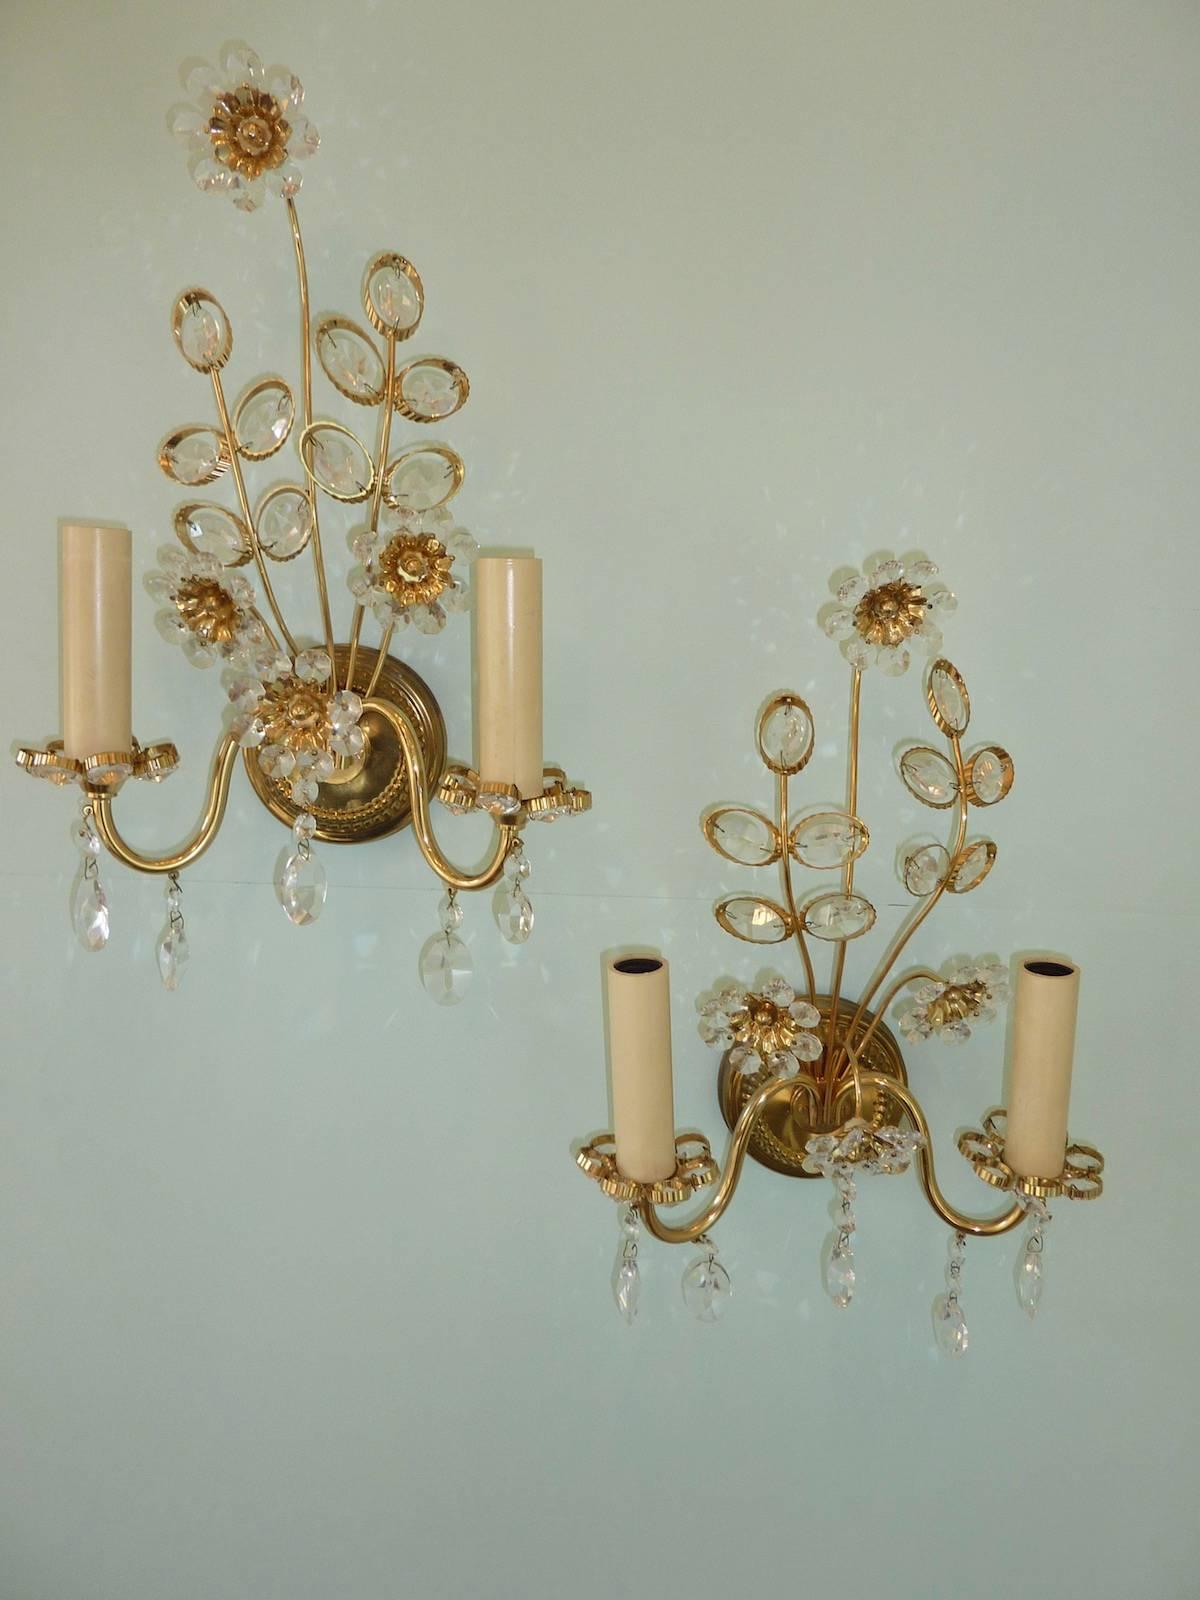 Pair of vintage gold-plated sconces with faceted crystal flowers made by the German company Palwa. Each fixture has two European style E14 sockets. It requires two European E14 candelabra bulbs.